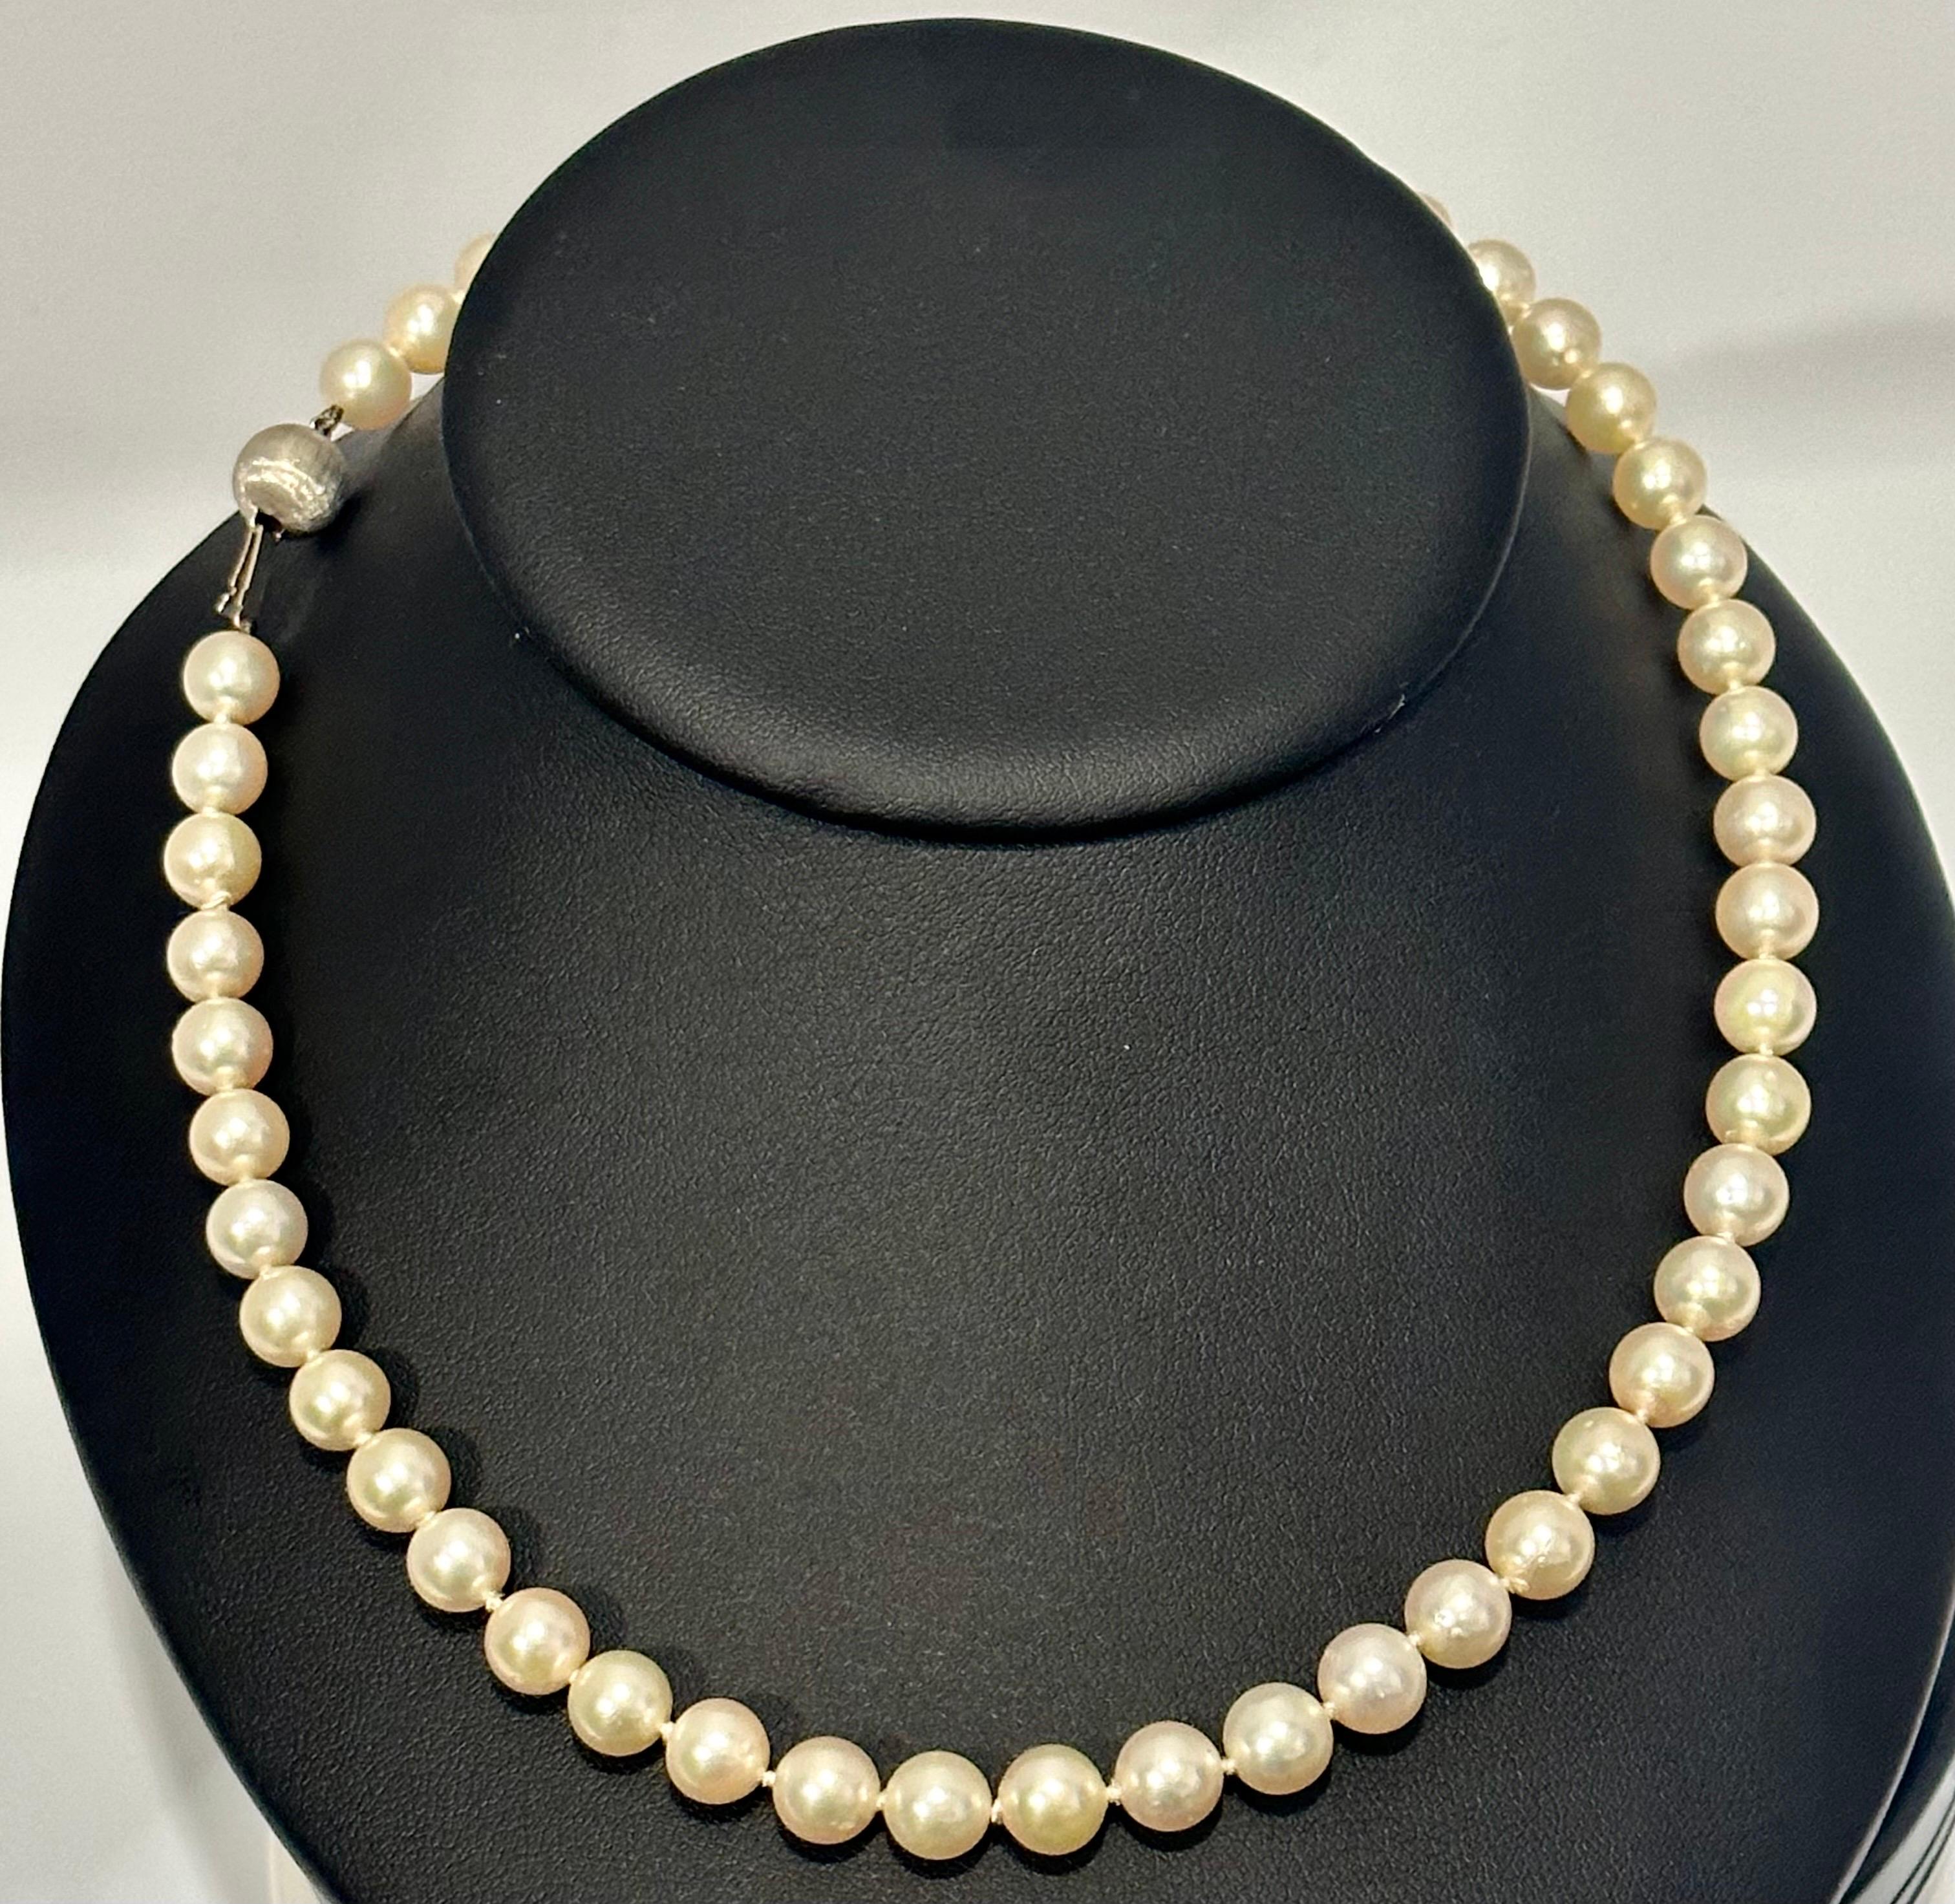 Vintage Cultured Akoya Pearl  Necklace Length 18